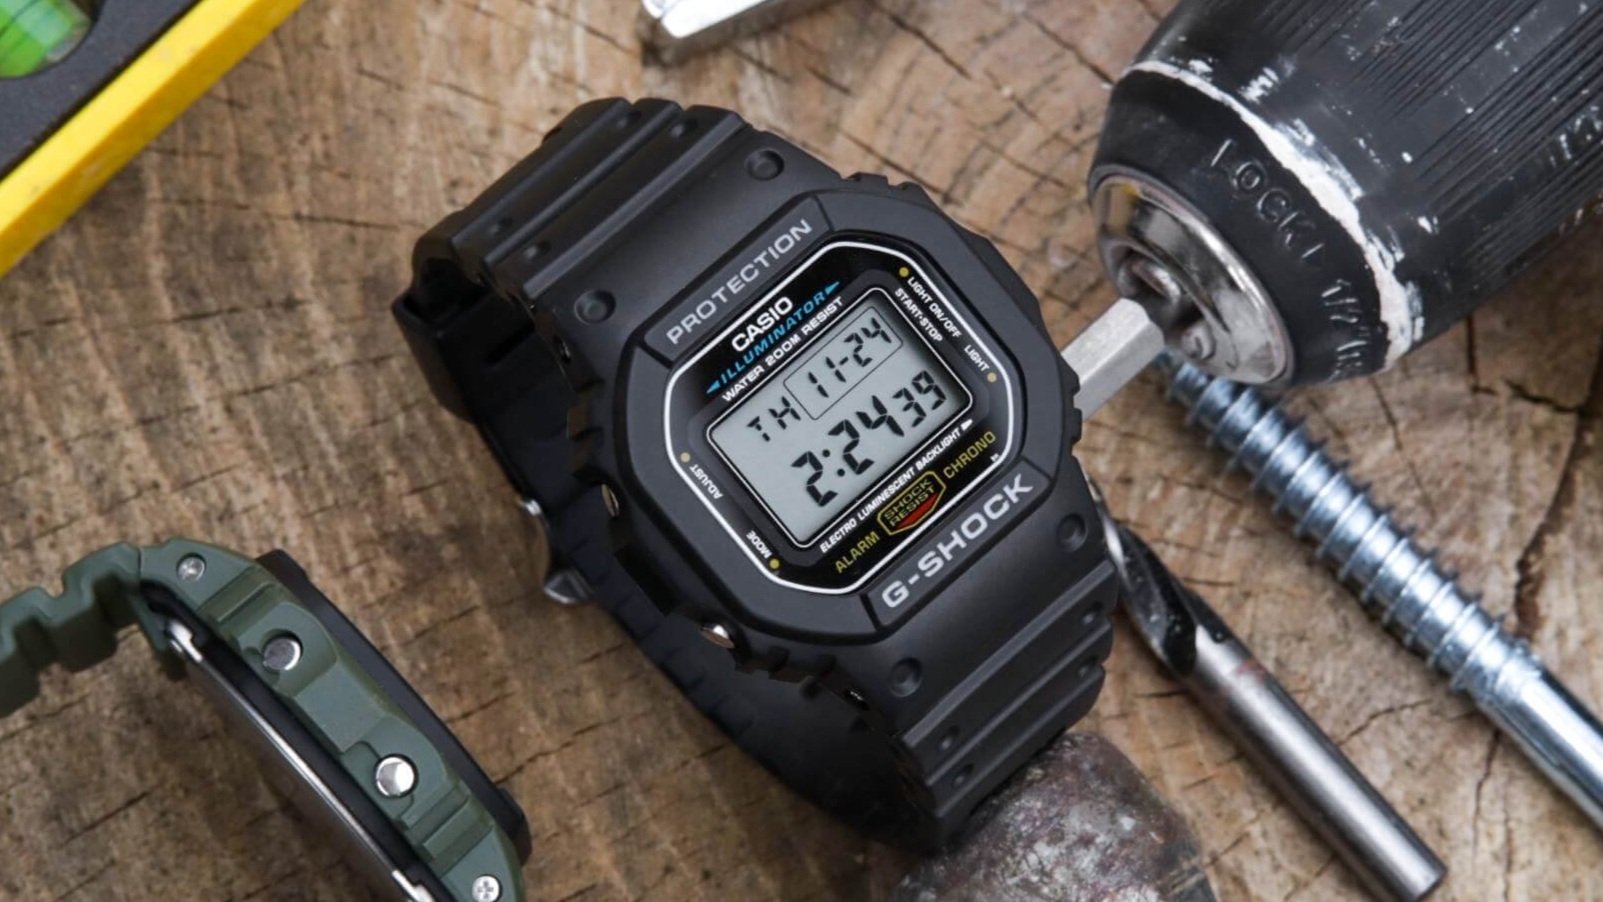 Casio G-Shock DW-5600 Review - Old But Still Gold?! — Ben's Watch Club